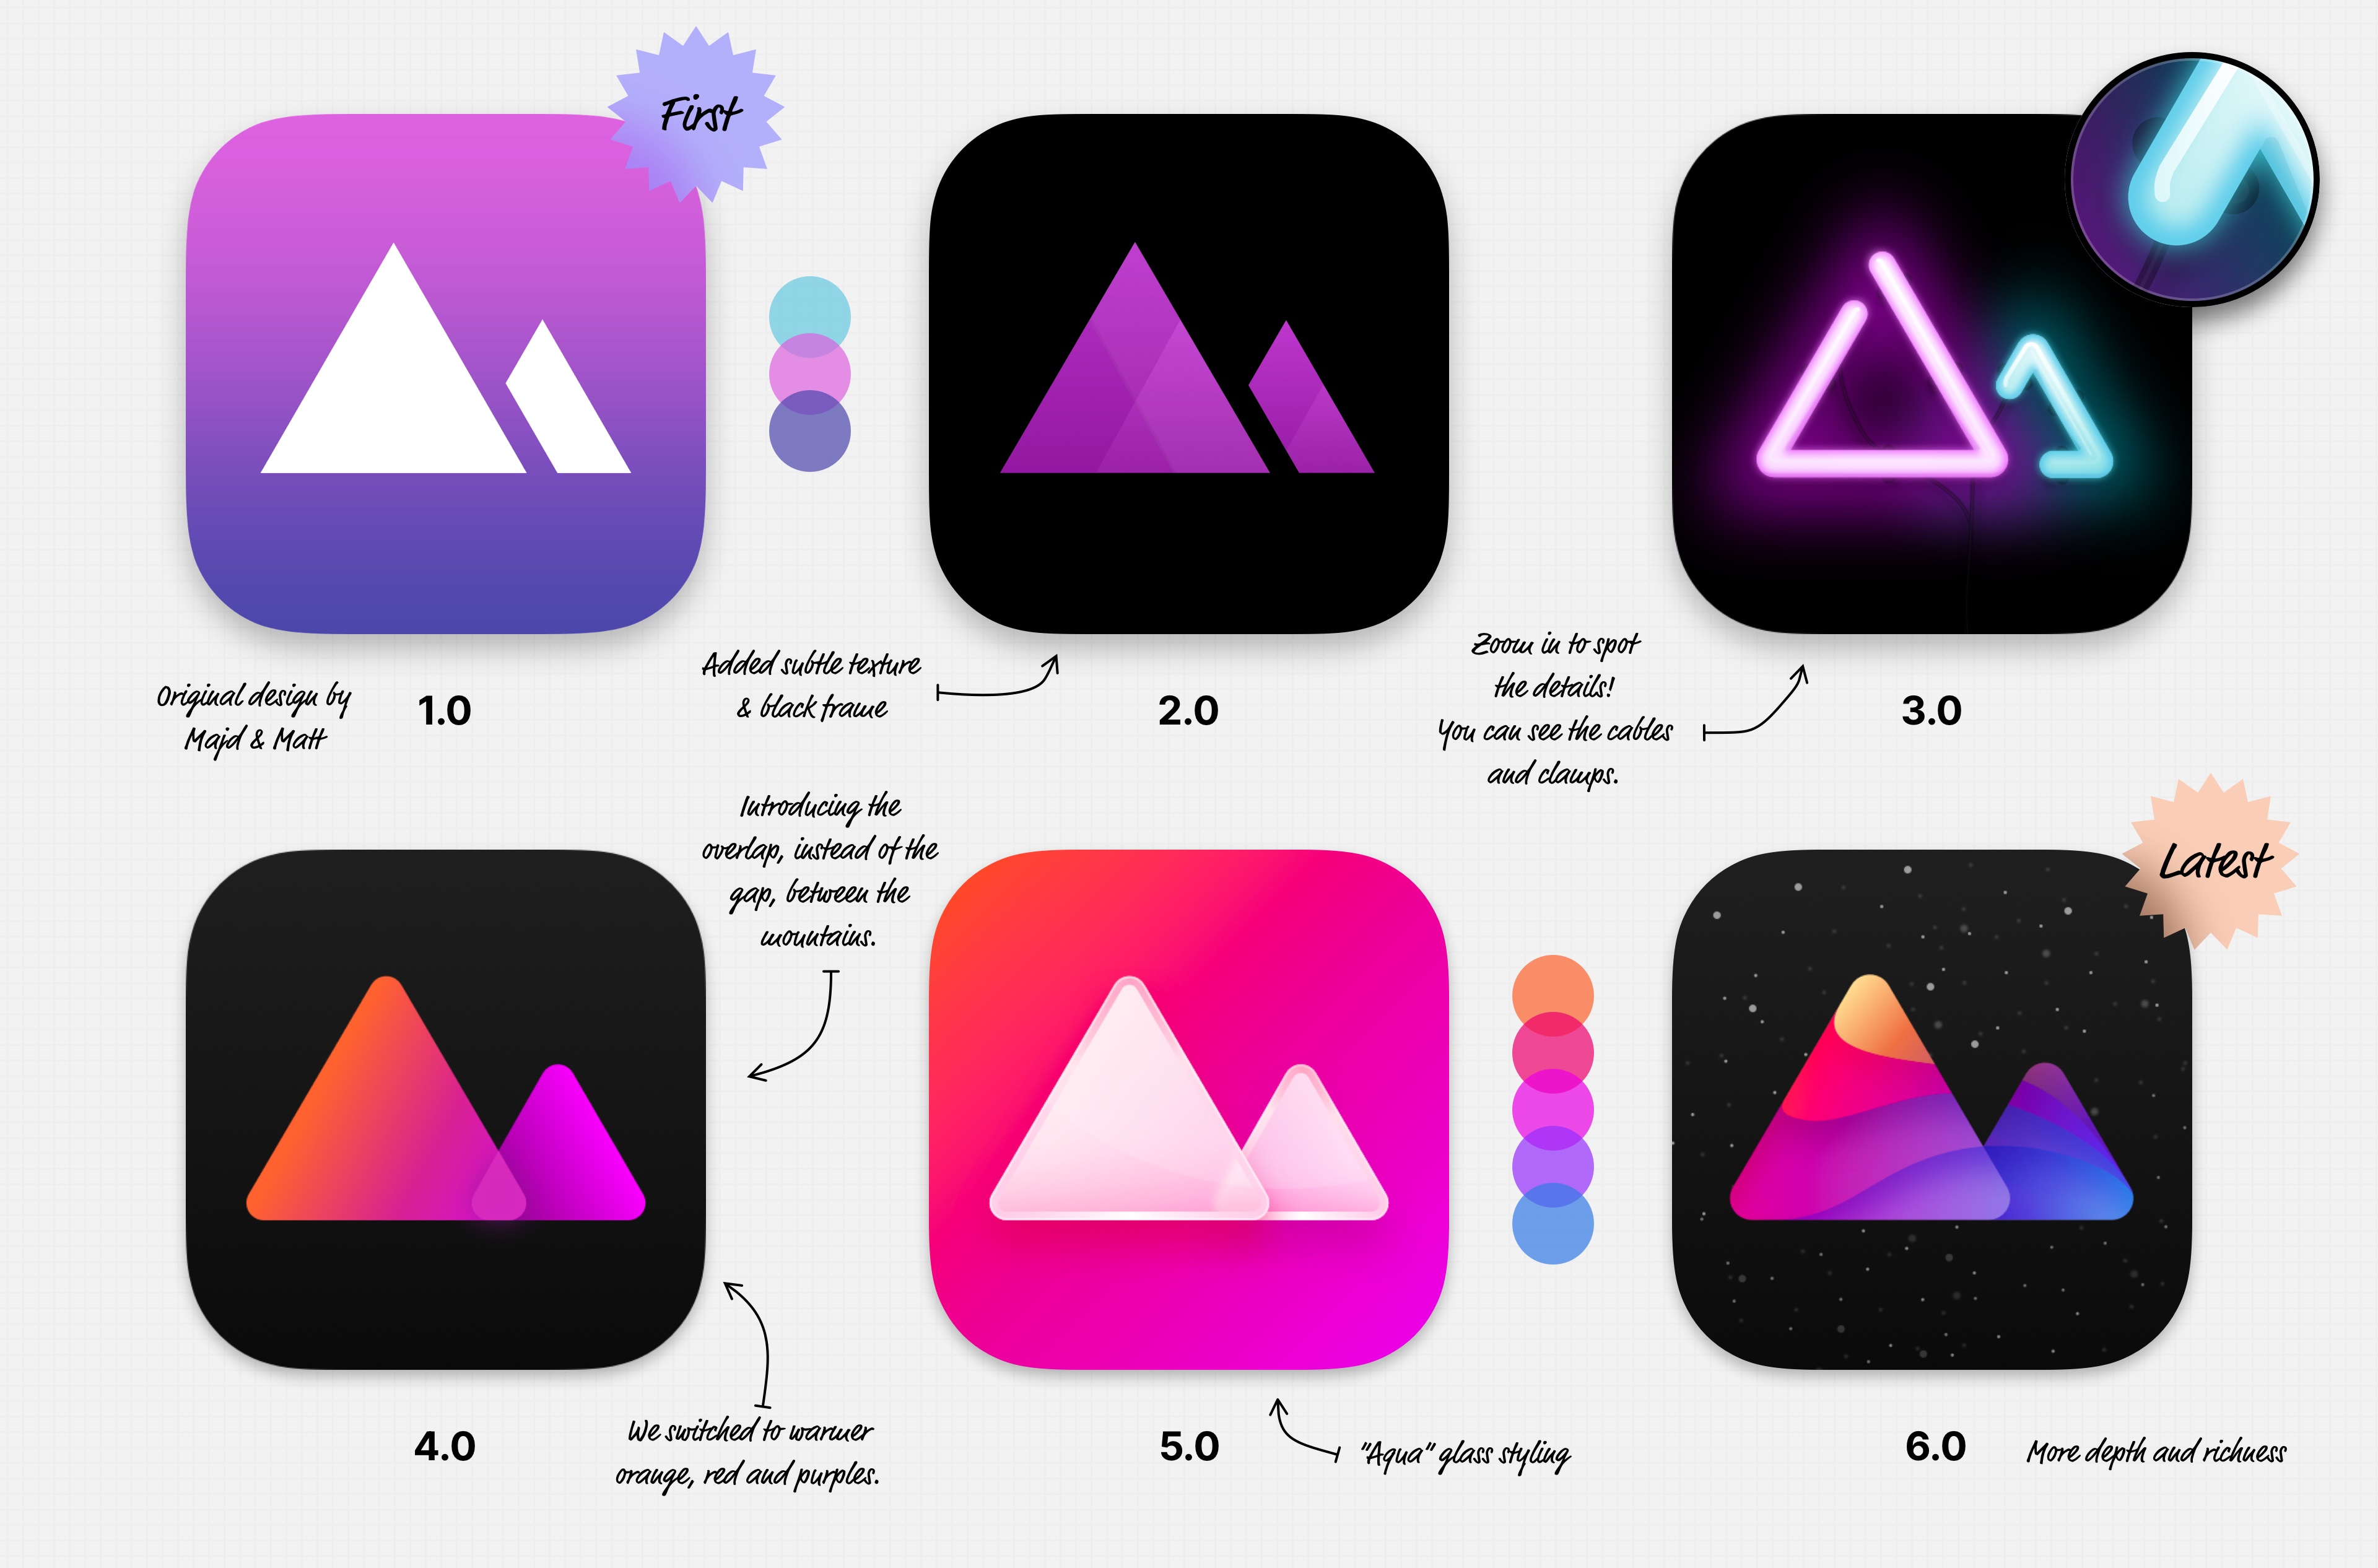 A grid of 2 x 3 Darkroom default app icons for all major versions